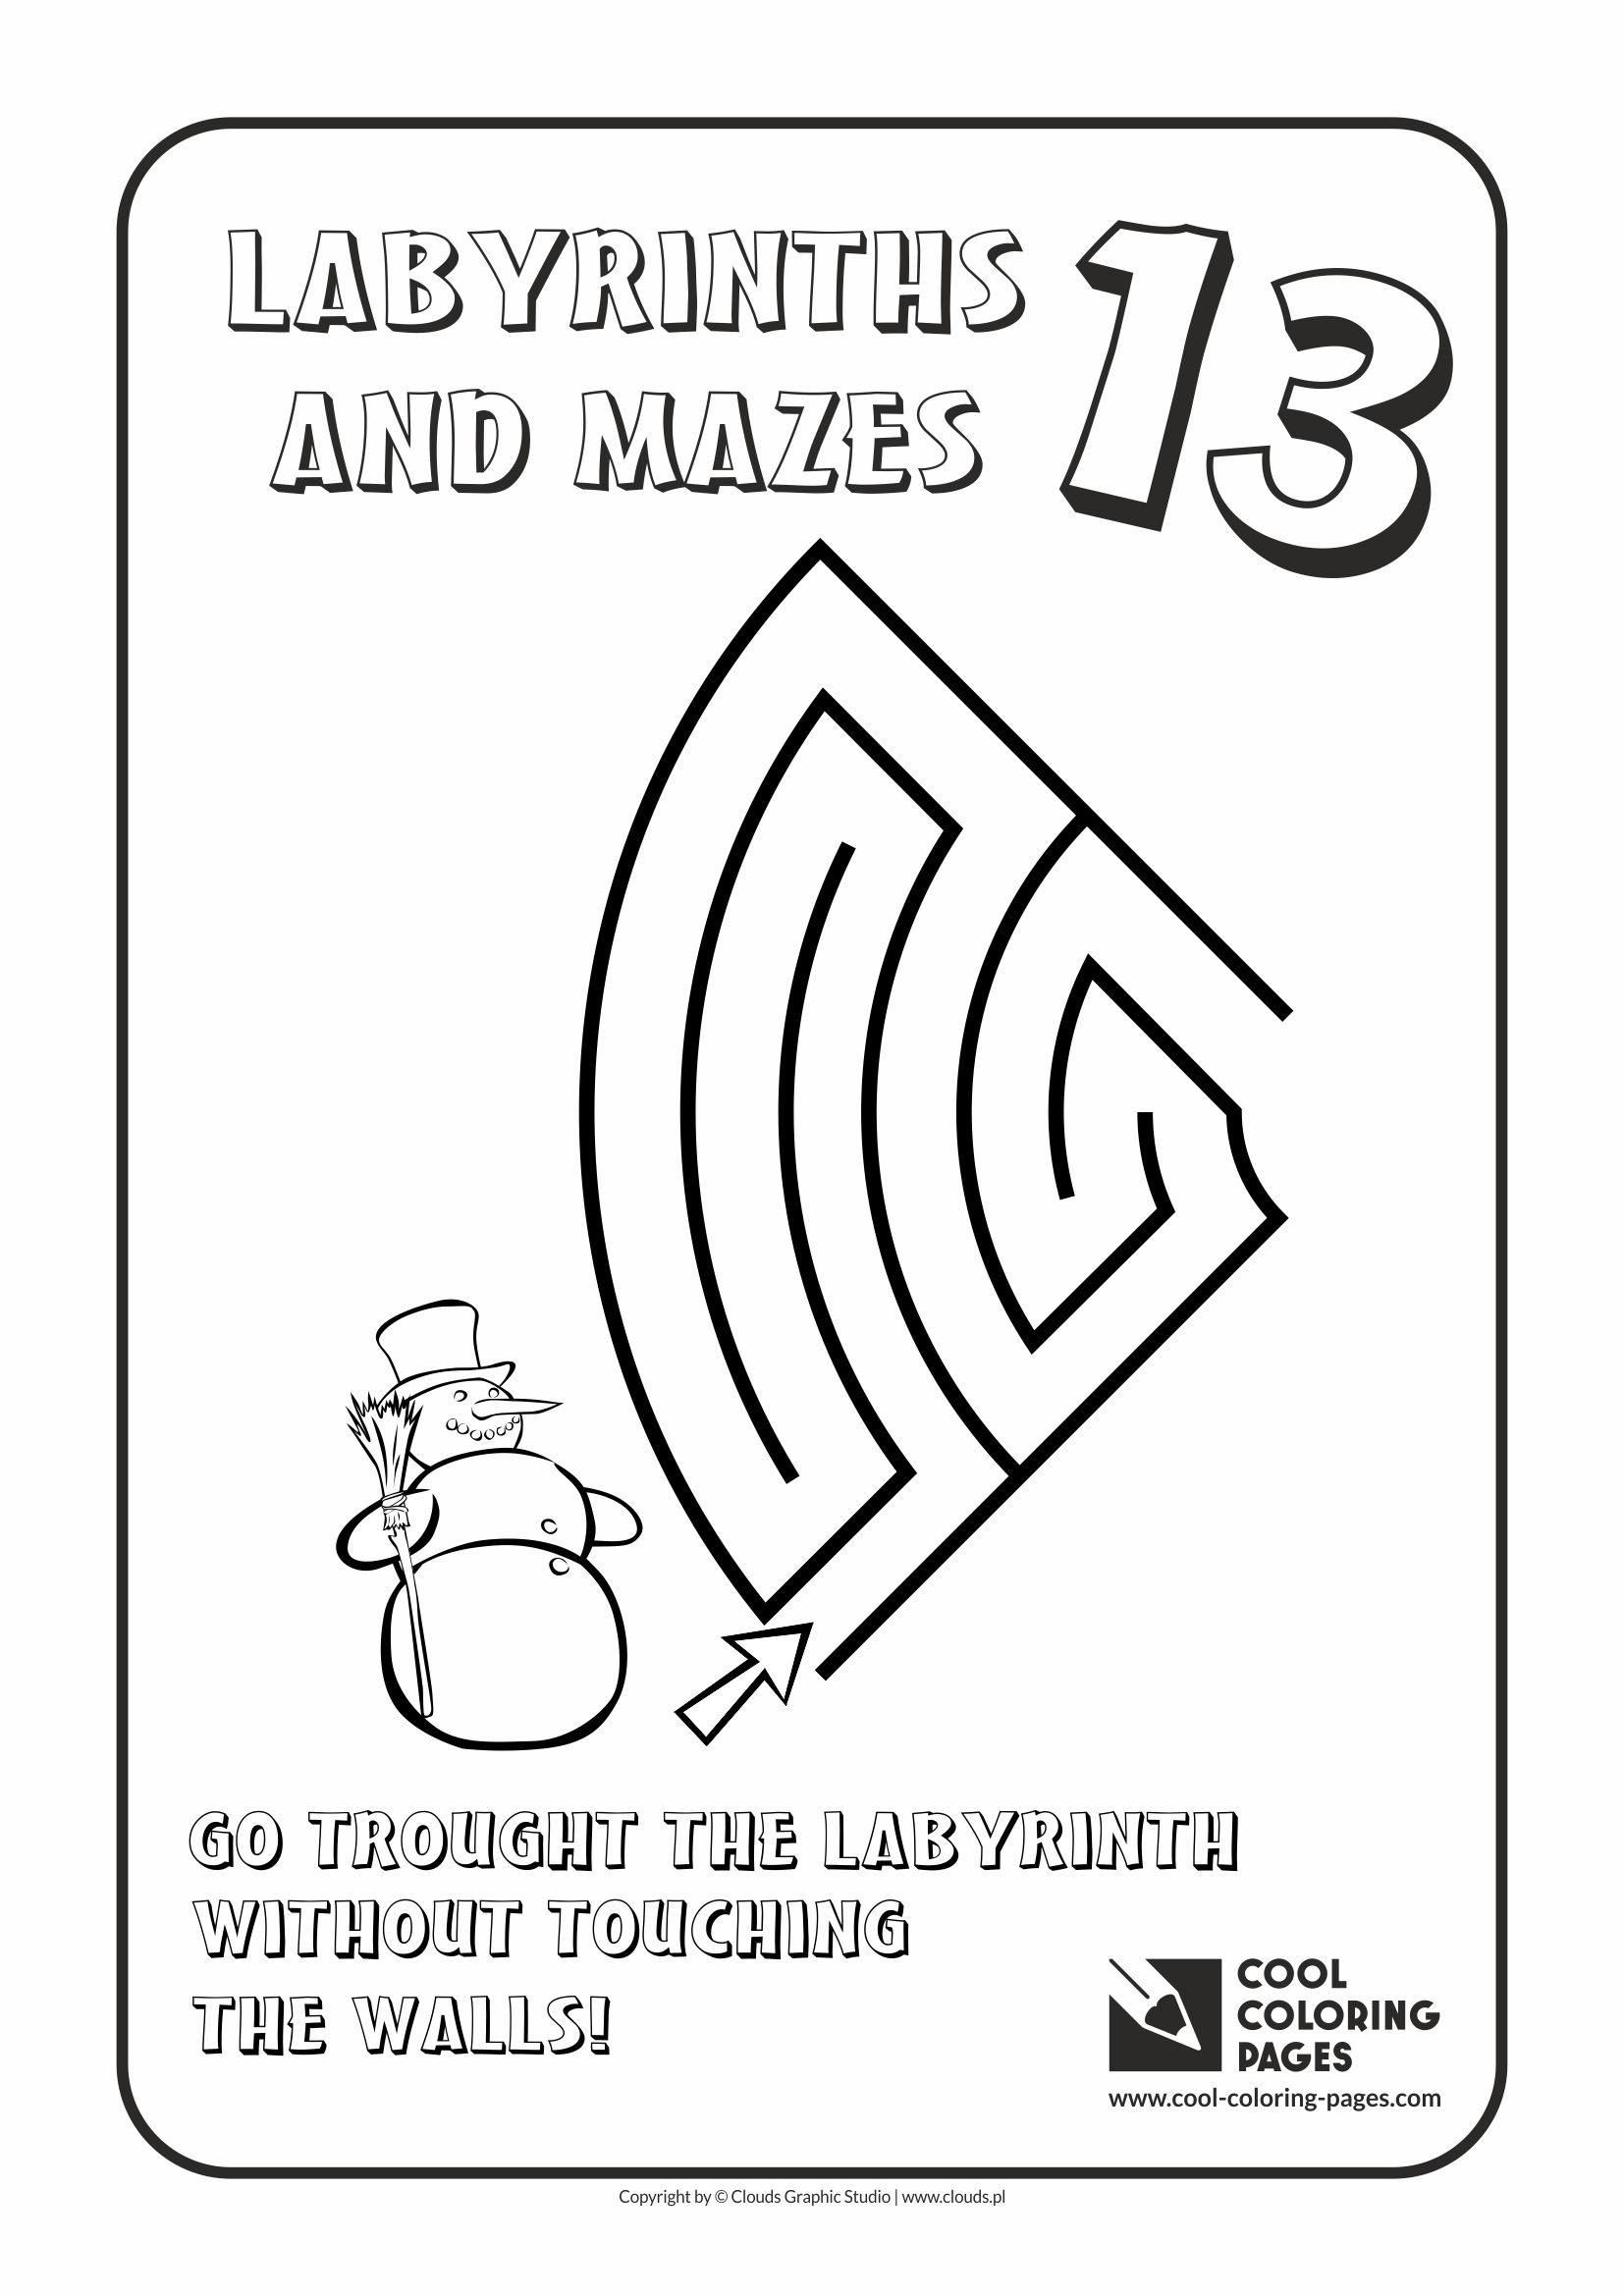 Cool Coloring Pages - Labyrinths and mazes / Maze no 13